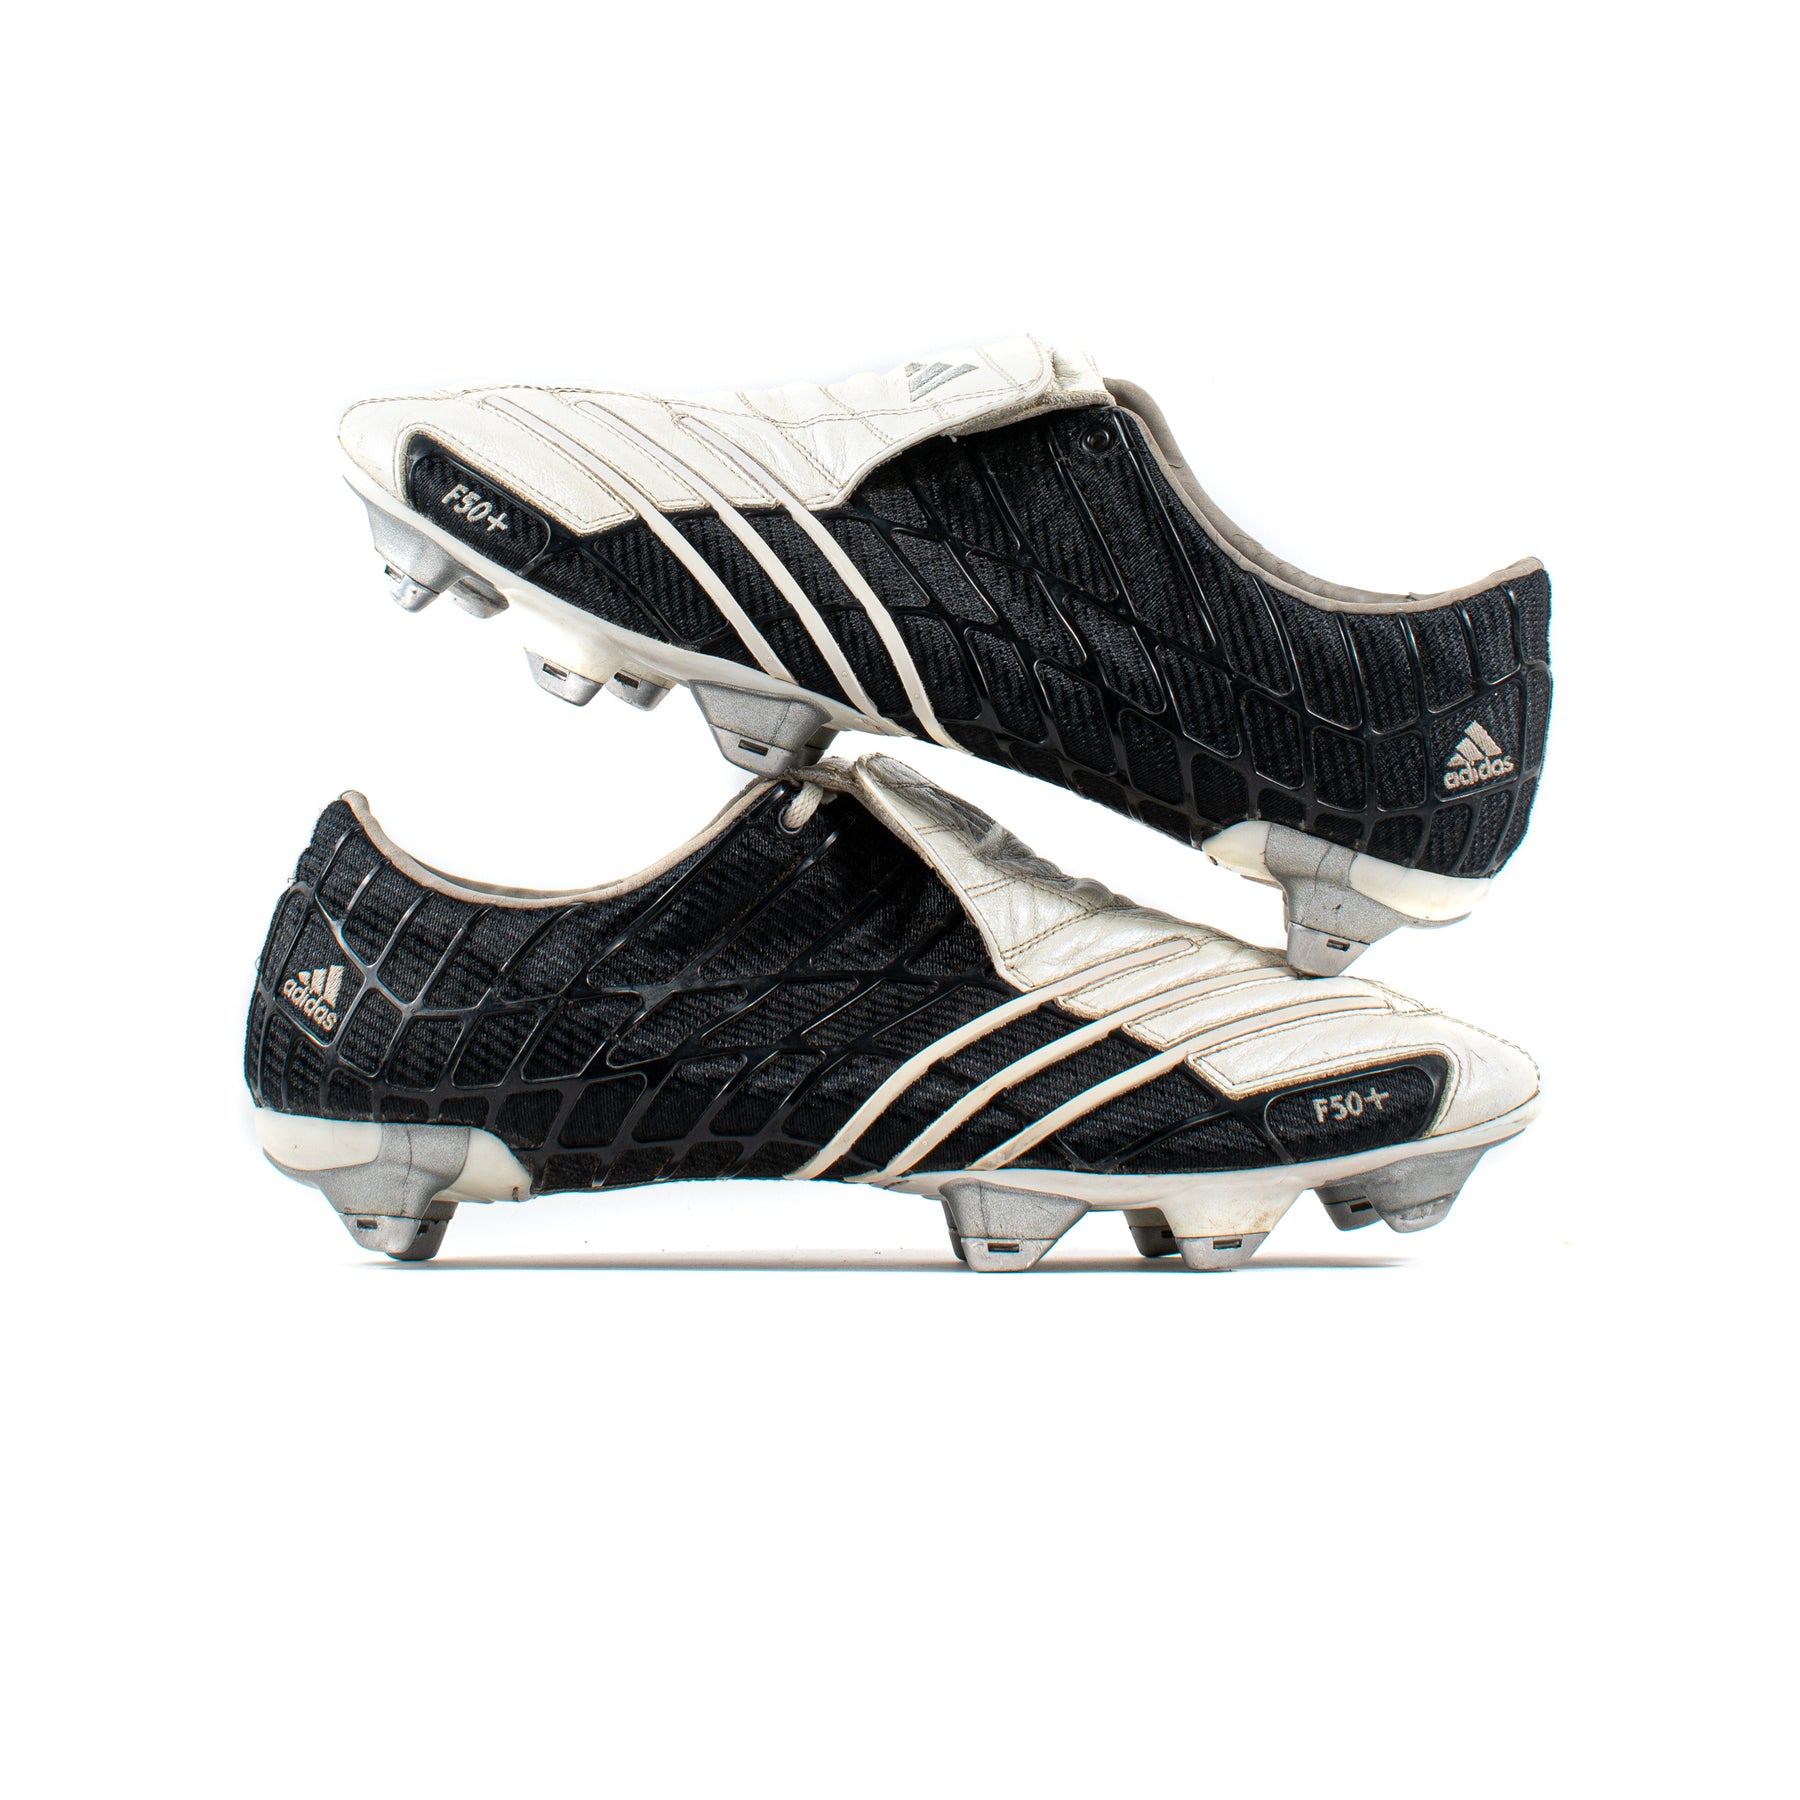 Especial frutas torre Adidas F50+ Spider White Black SG – Classic Soccer Cleats